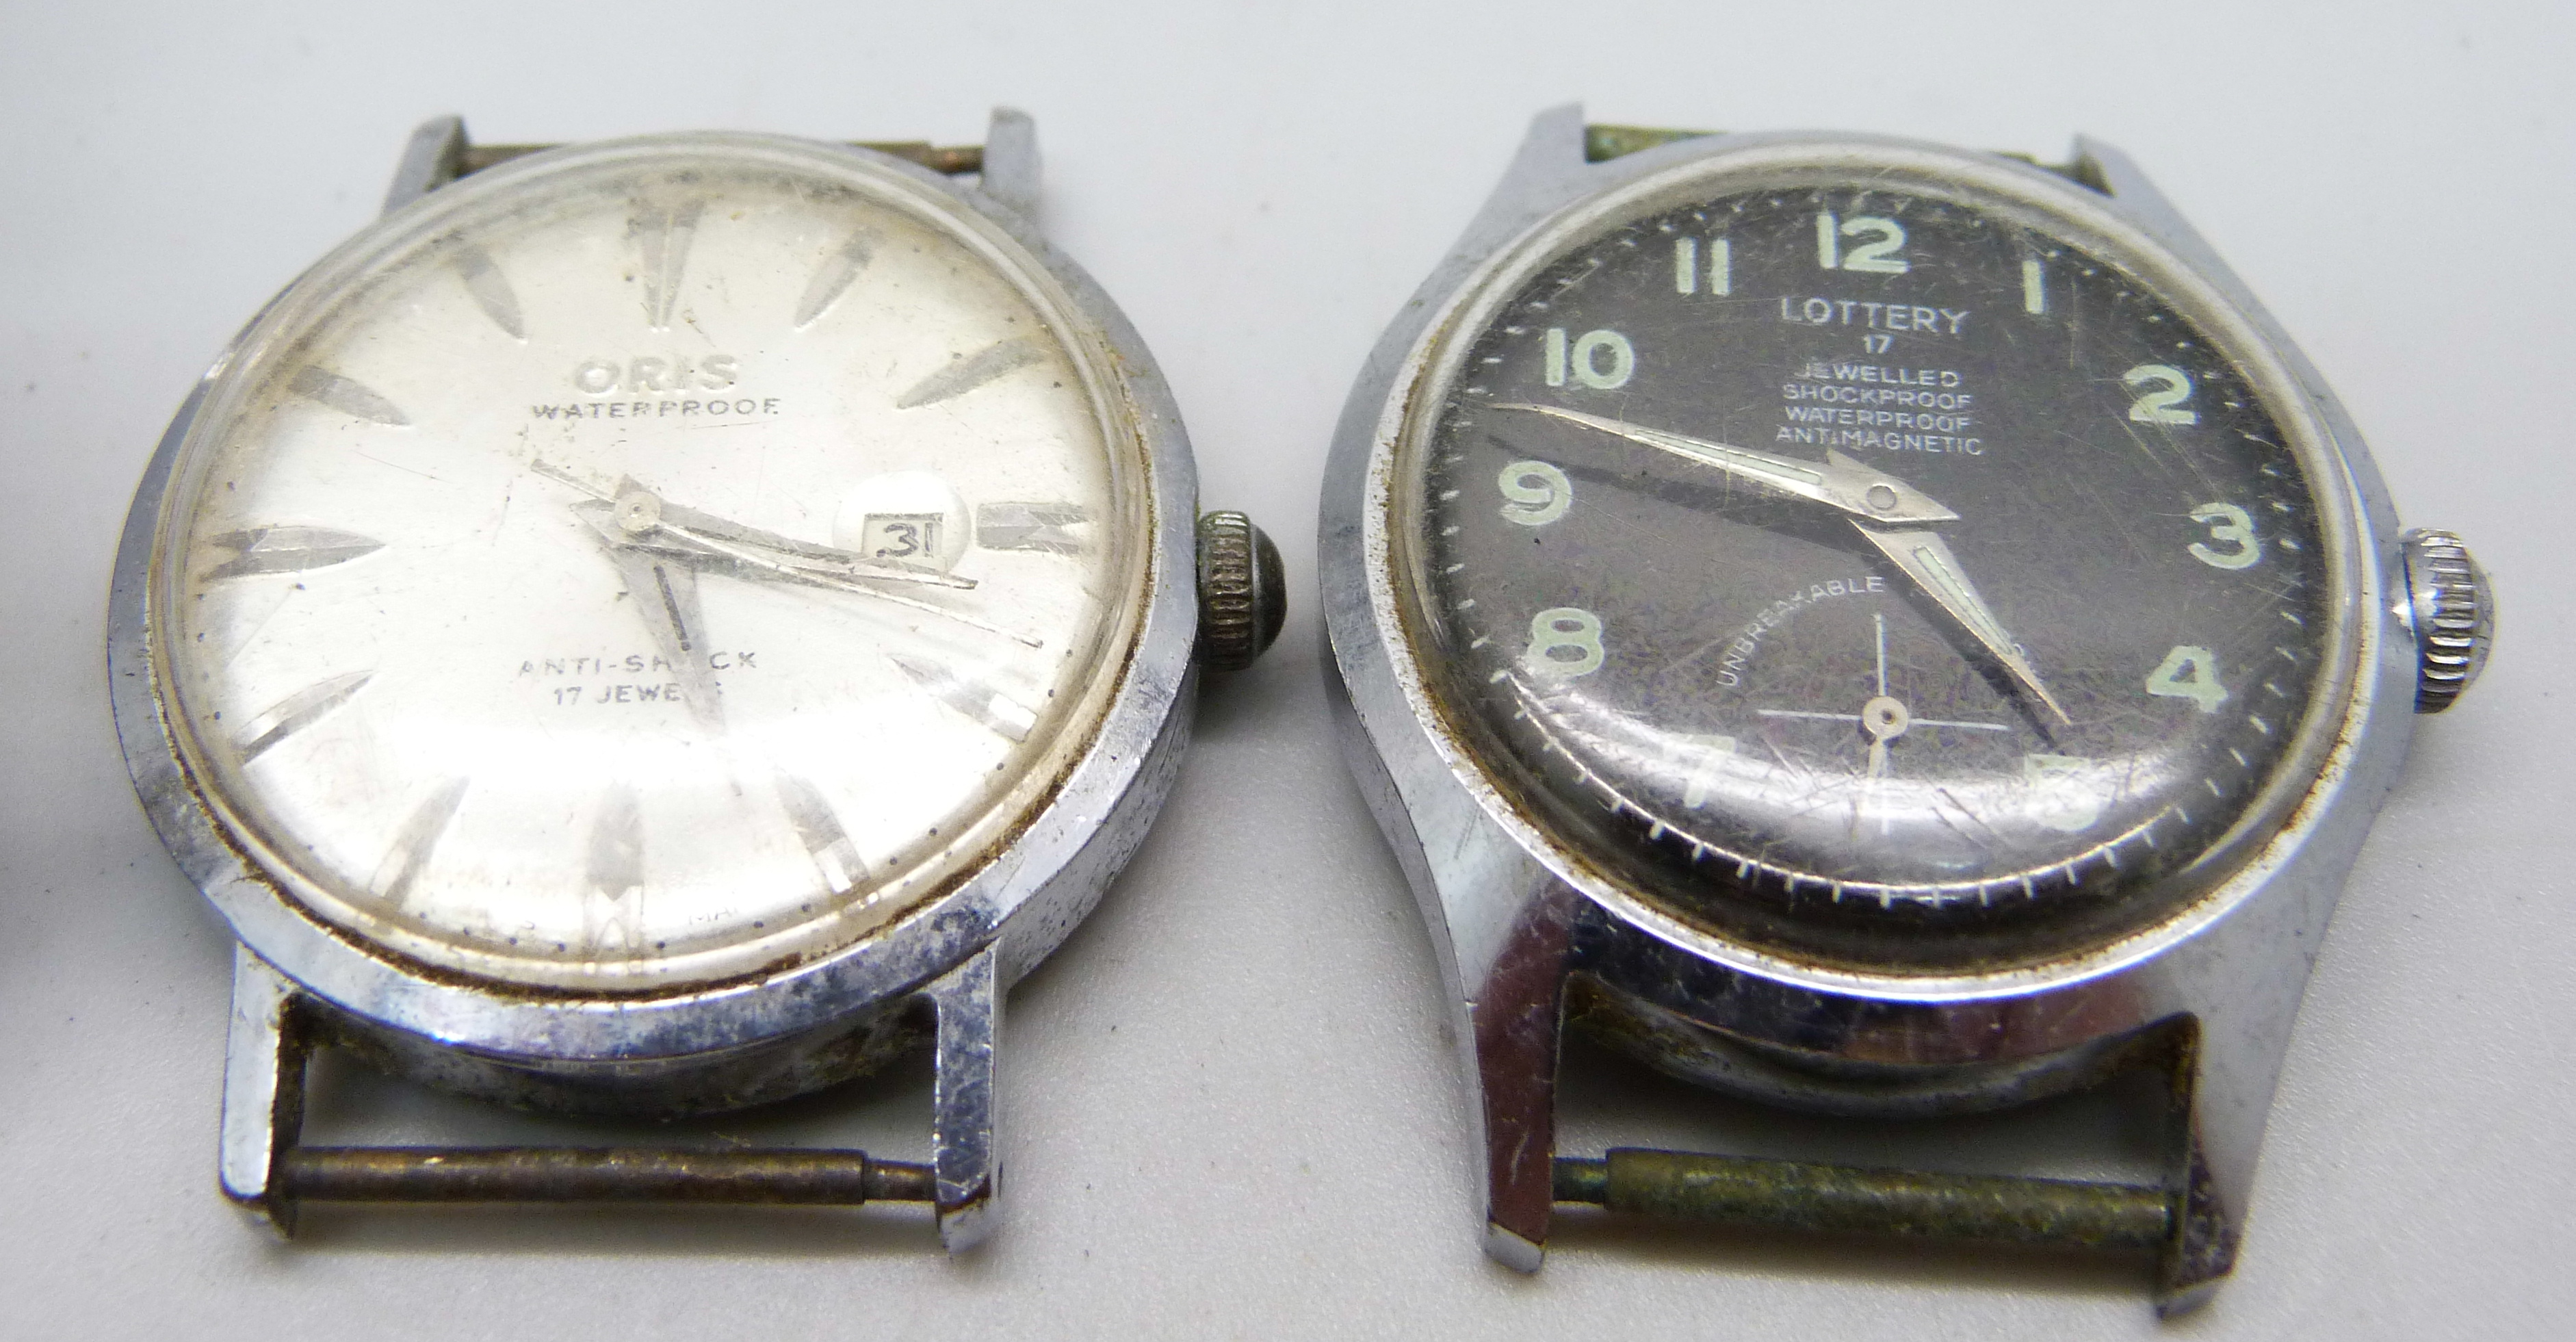 Three gentleman's wristwatches, Oris, Cyma Watersport and one marked Lottery - Image 2 of 3